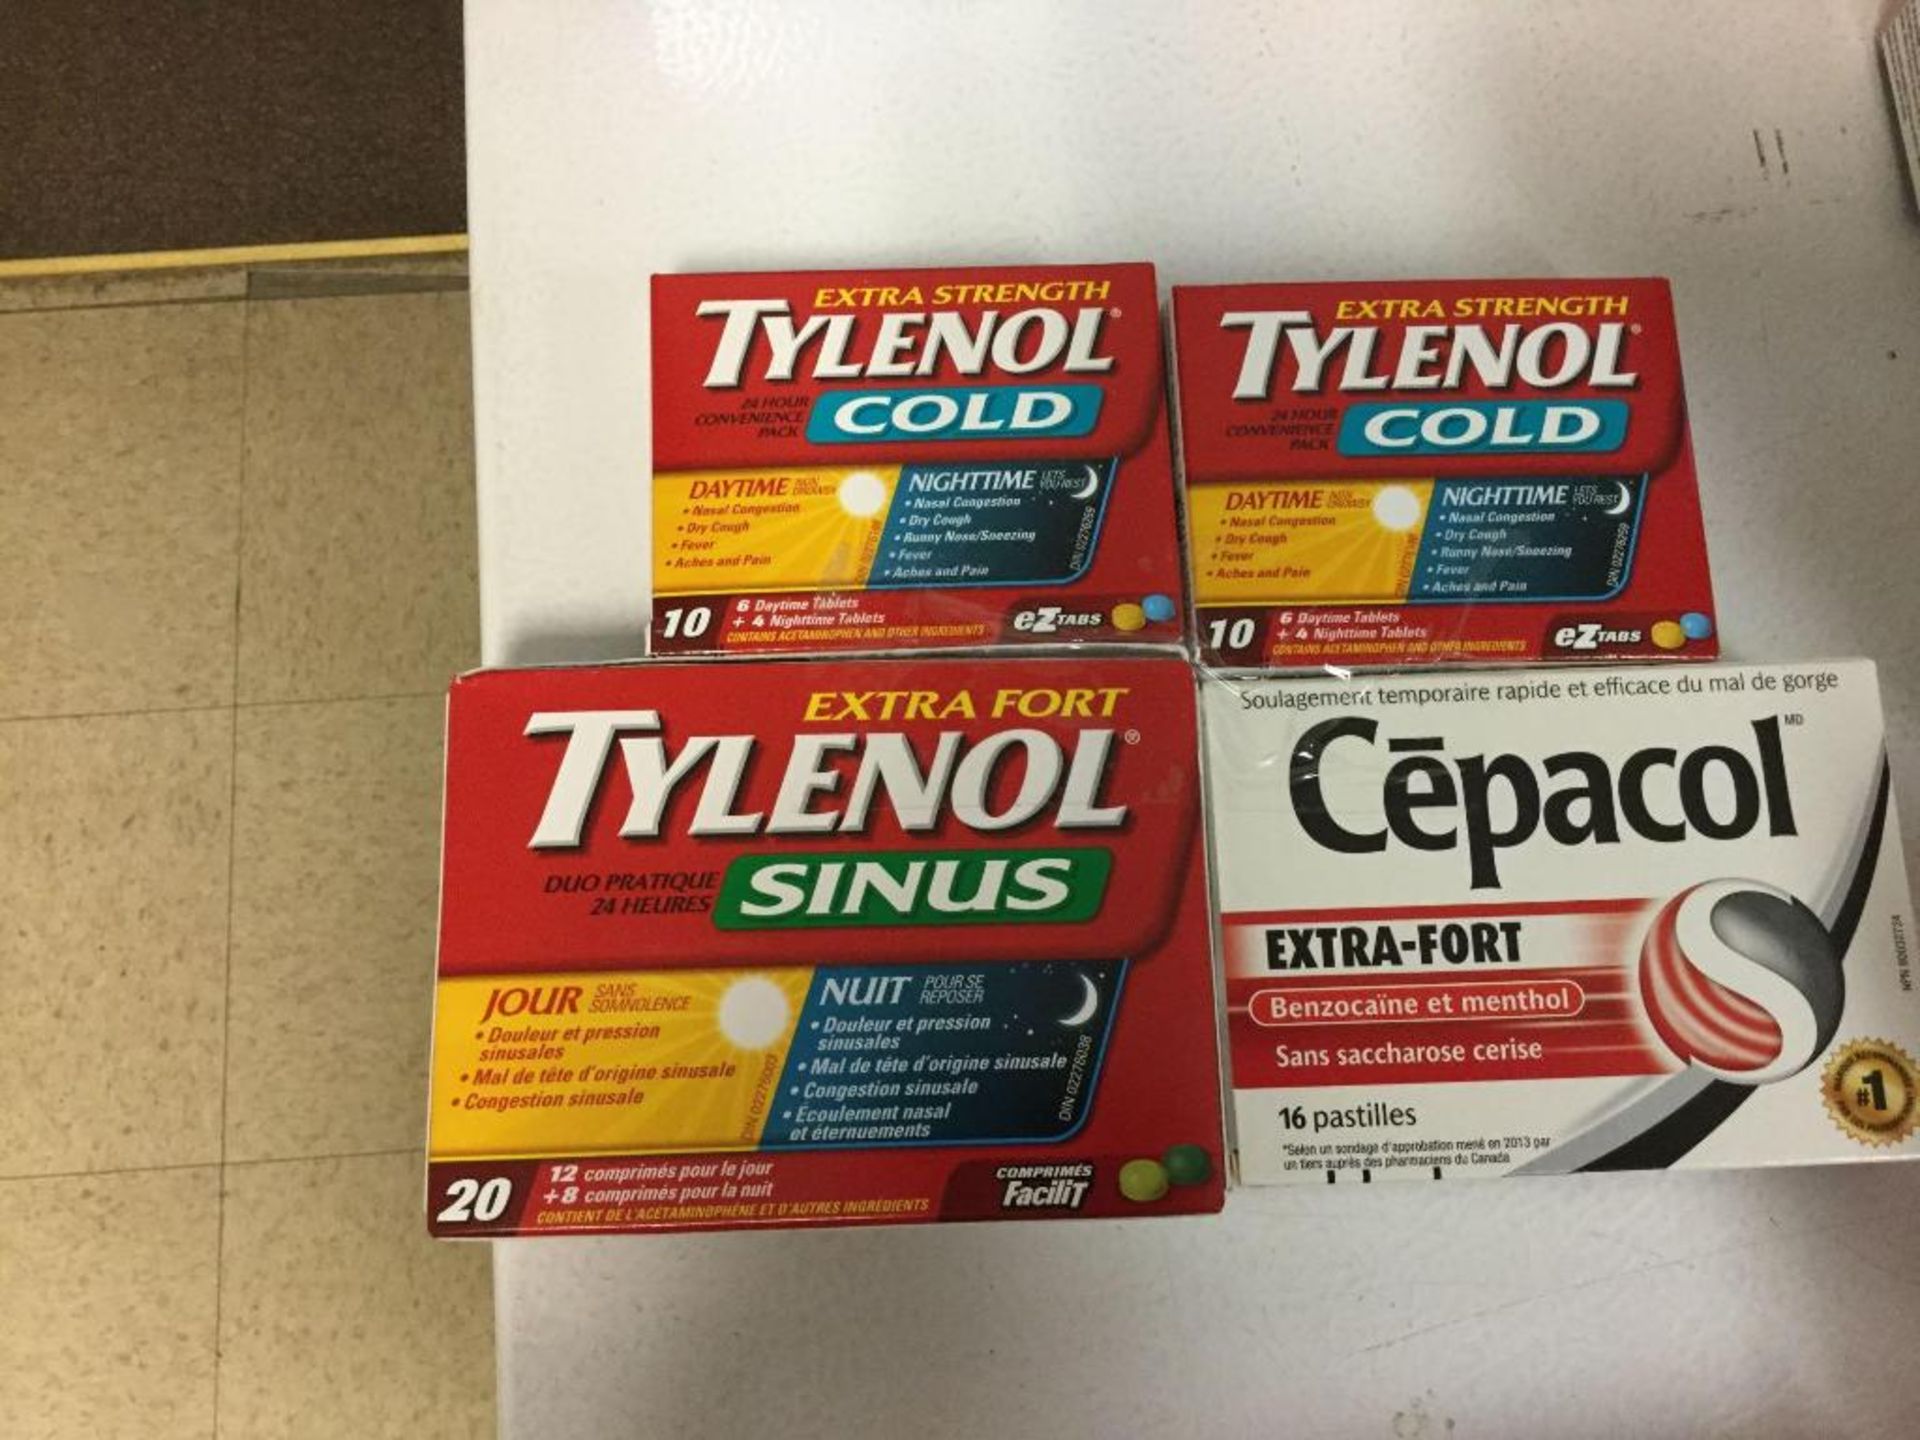 Lot of 4 - Tylenol Cold, Tylenol Sinus, and Cepacol